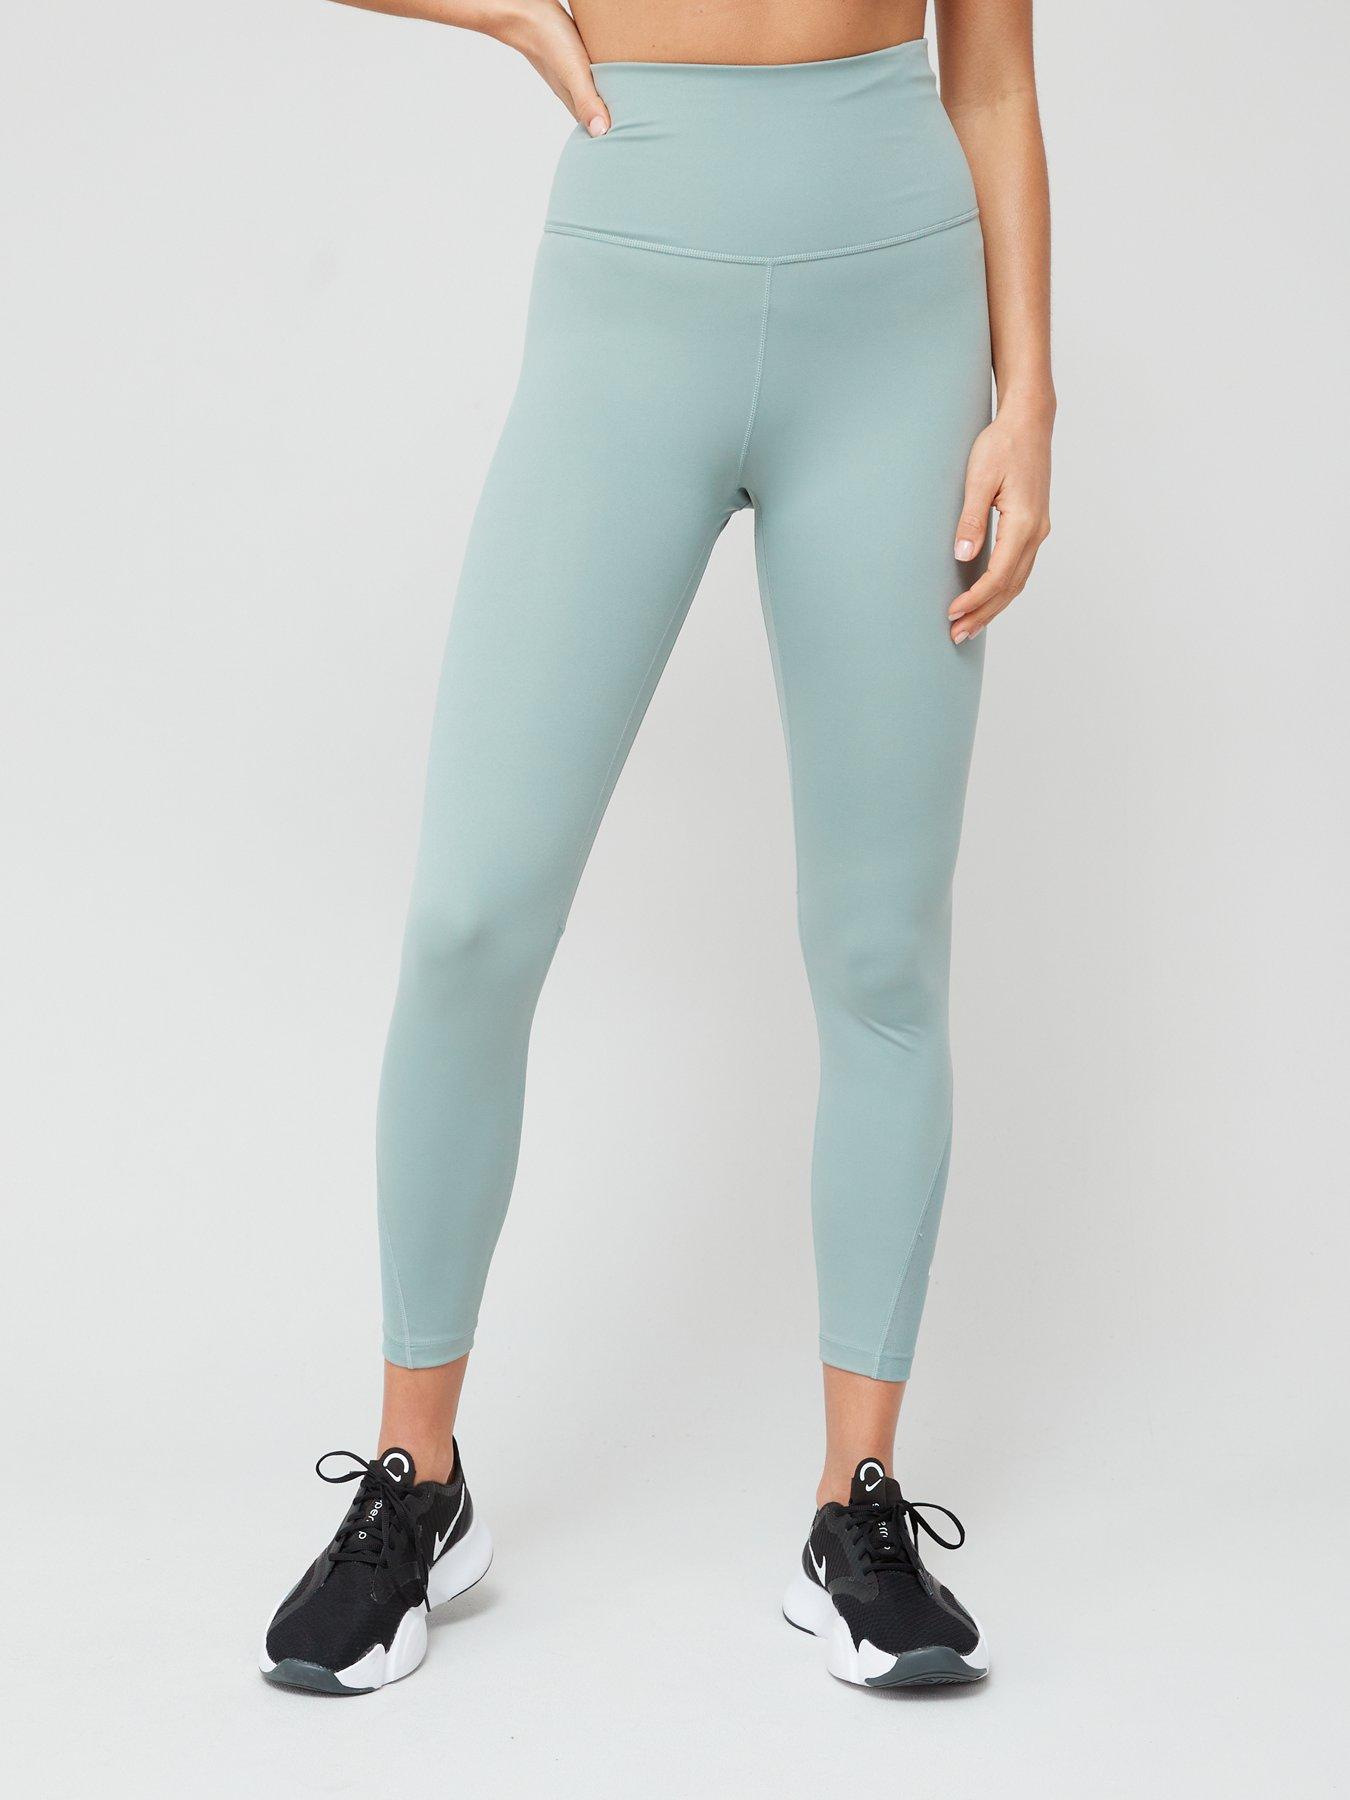 Nike Yoga Luxe Women's Infinalon Ribbed 7/8 Tights (light Thistle) - Clearance  Sale In L Thsl/saphre | ModeSens